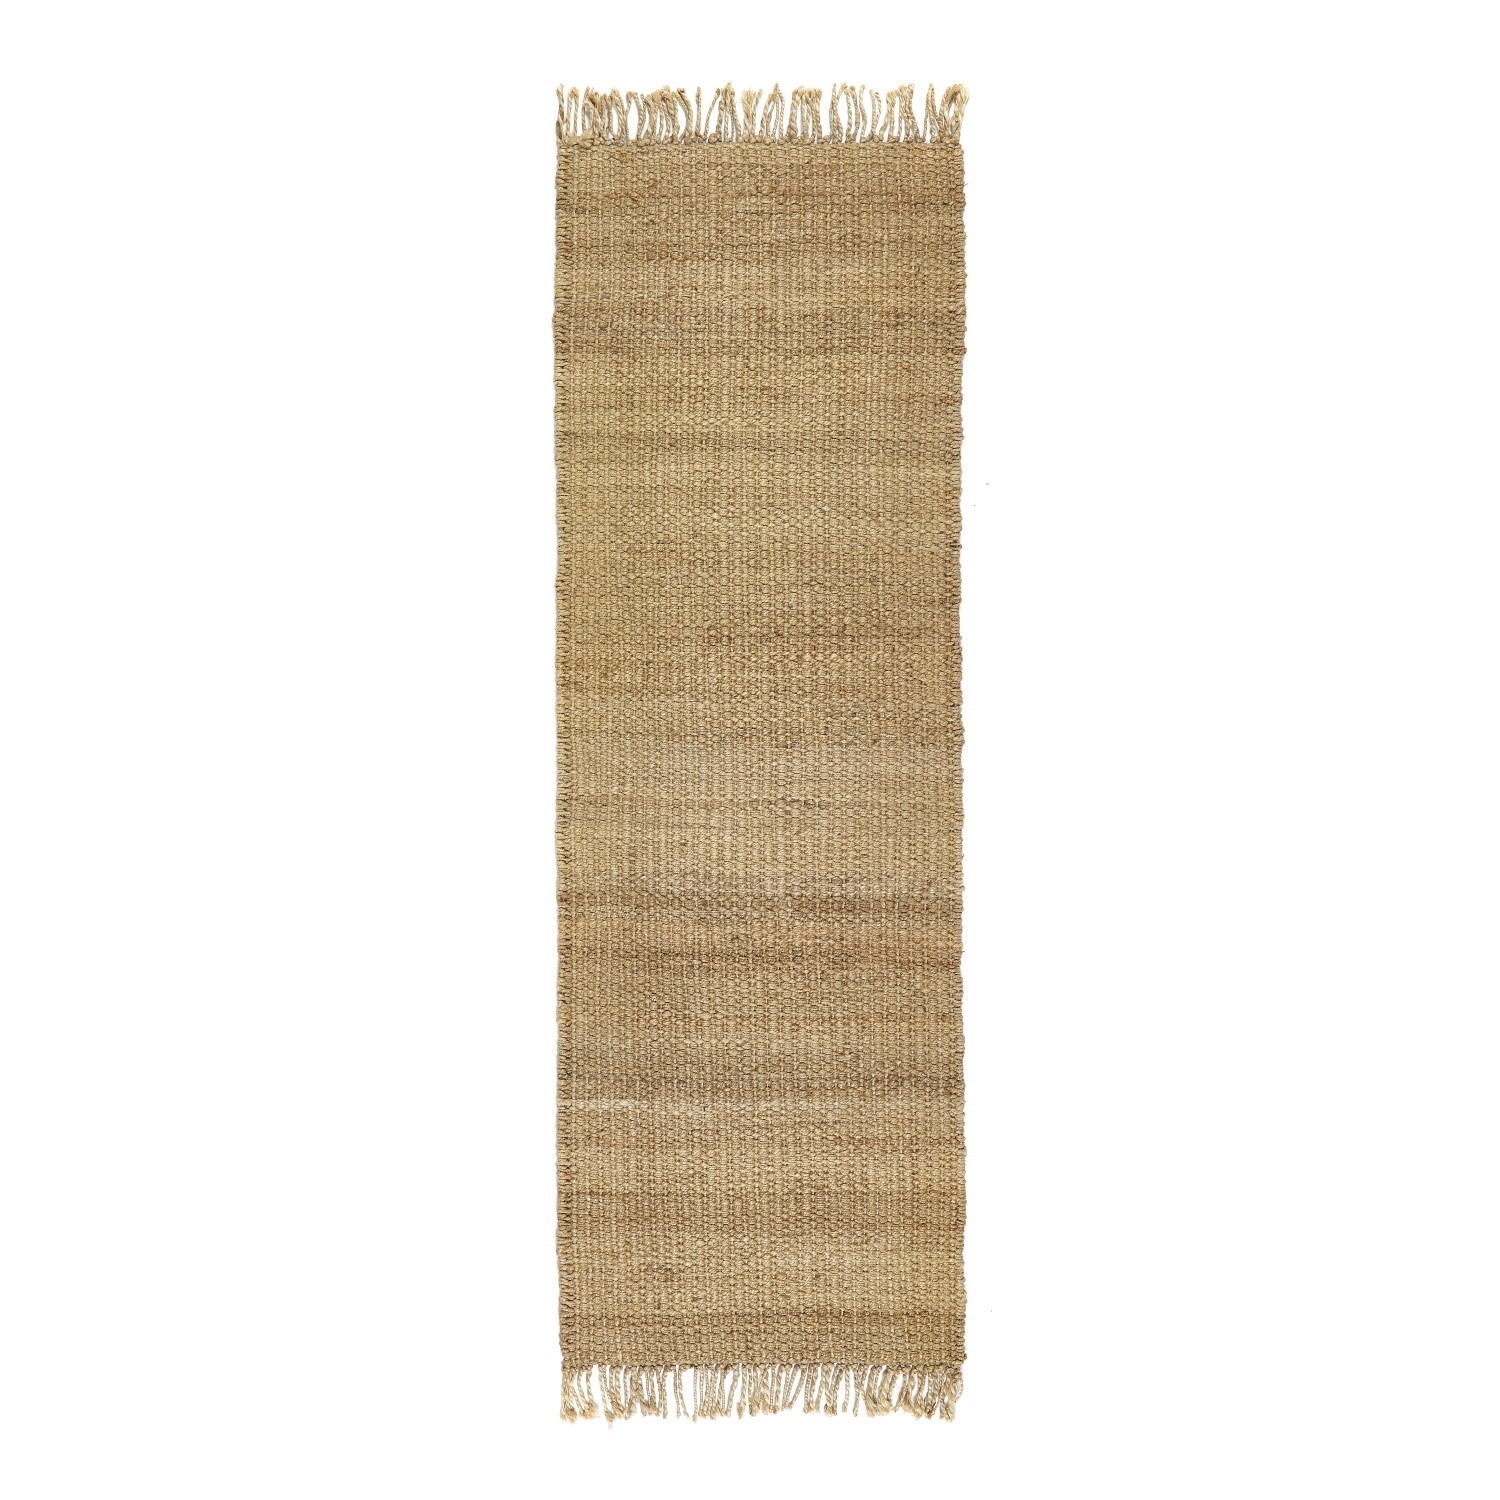 Photo of Jute runner rug with fringed edging 210x67cm - ripley